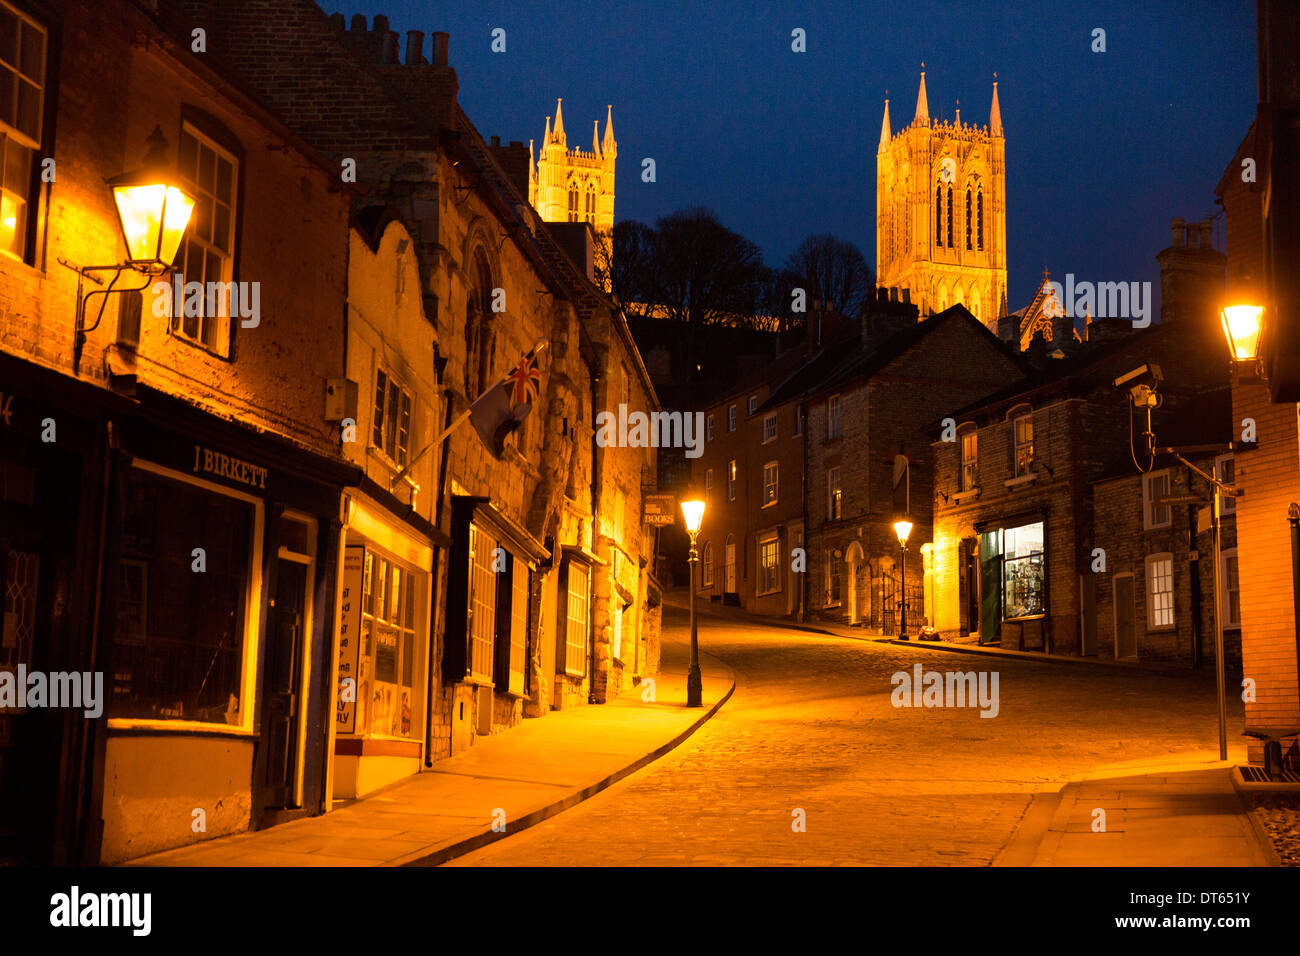 The view of Lincoln Cathedral from the High Street looking up Steep Hill photographed at evening time. Stock Photo